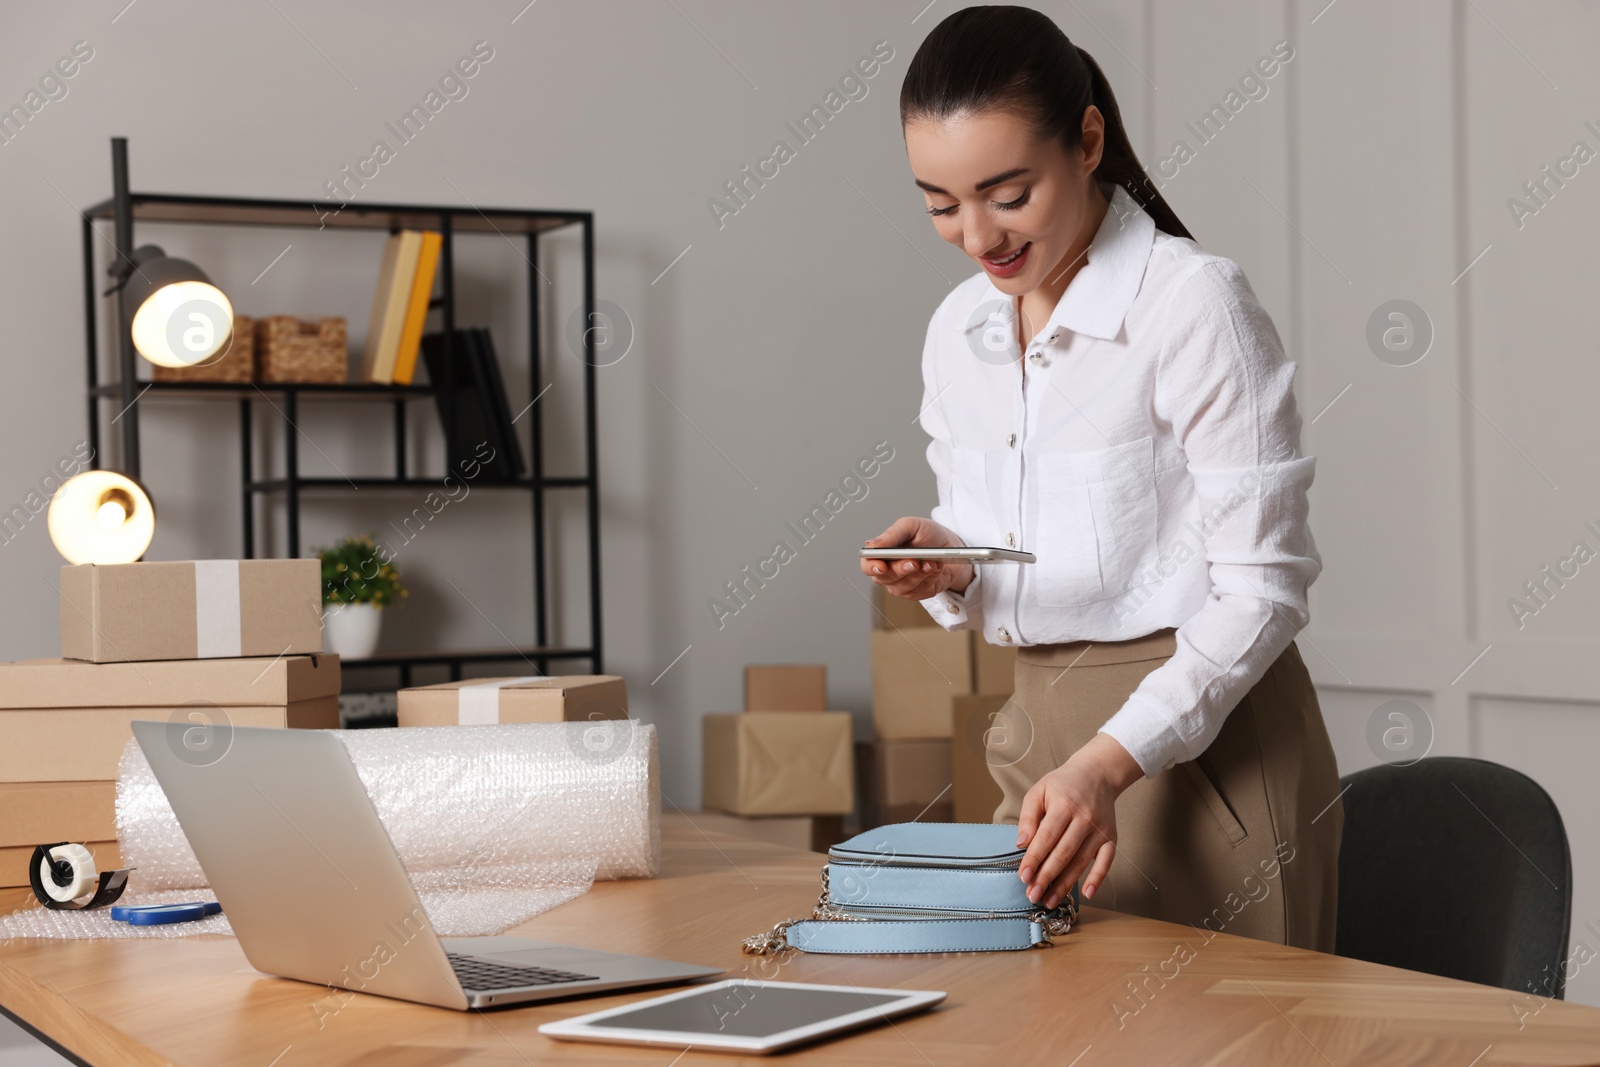 Photo of Seller taking picture of handbag at table in office. Online store